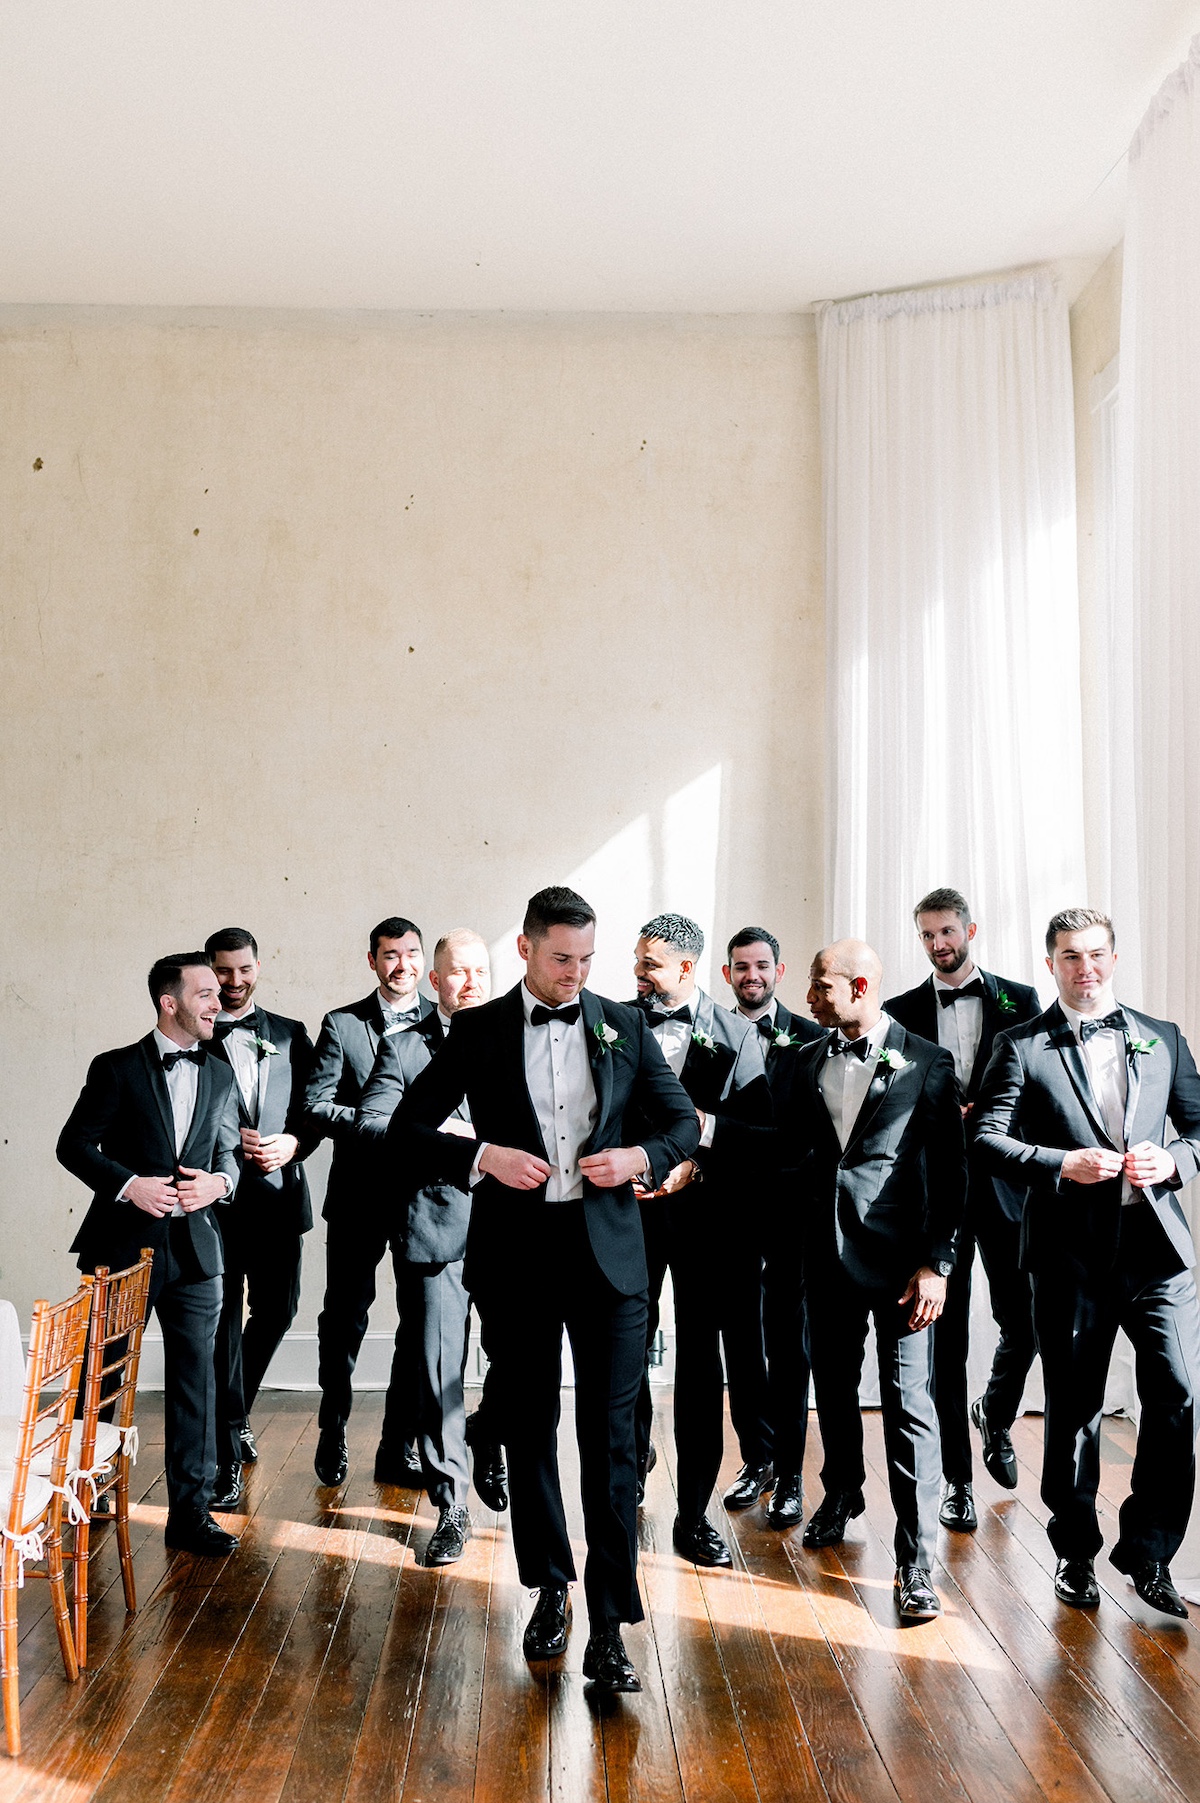 Candid editorial shot capturing the camaraderie of groomsmen, exuding timeless sophistication in every gesture.